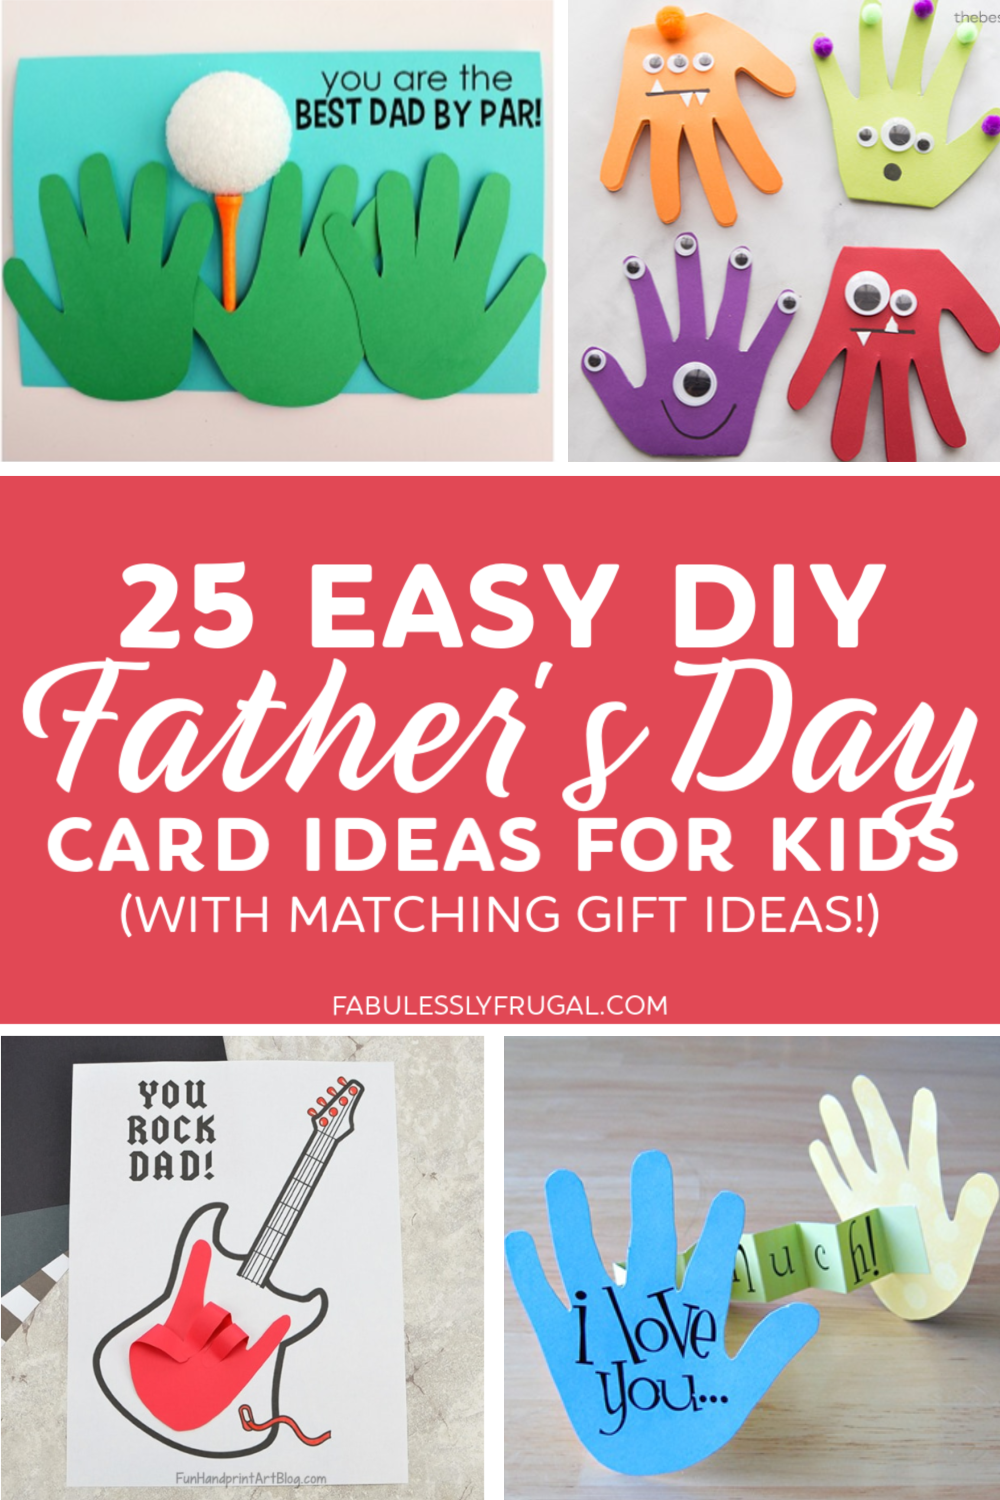 Easy homemade Father's Day card ideas